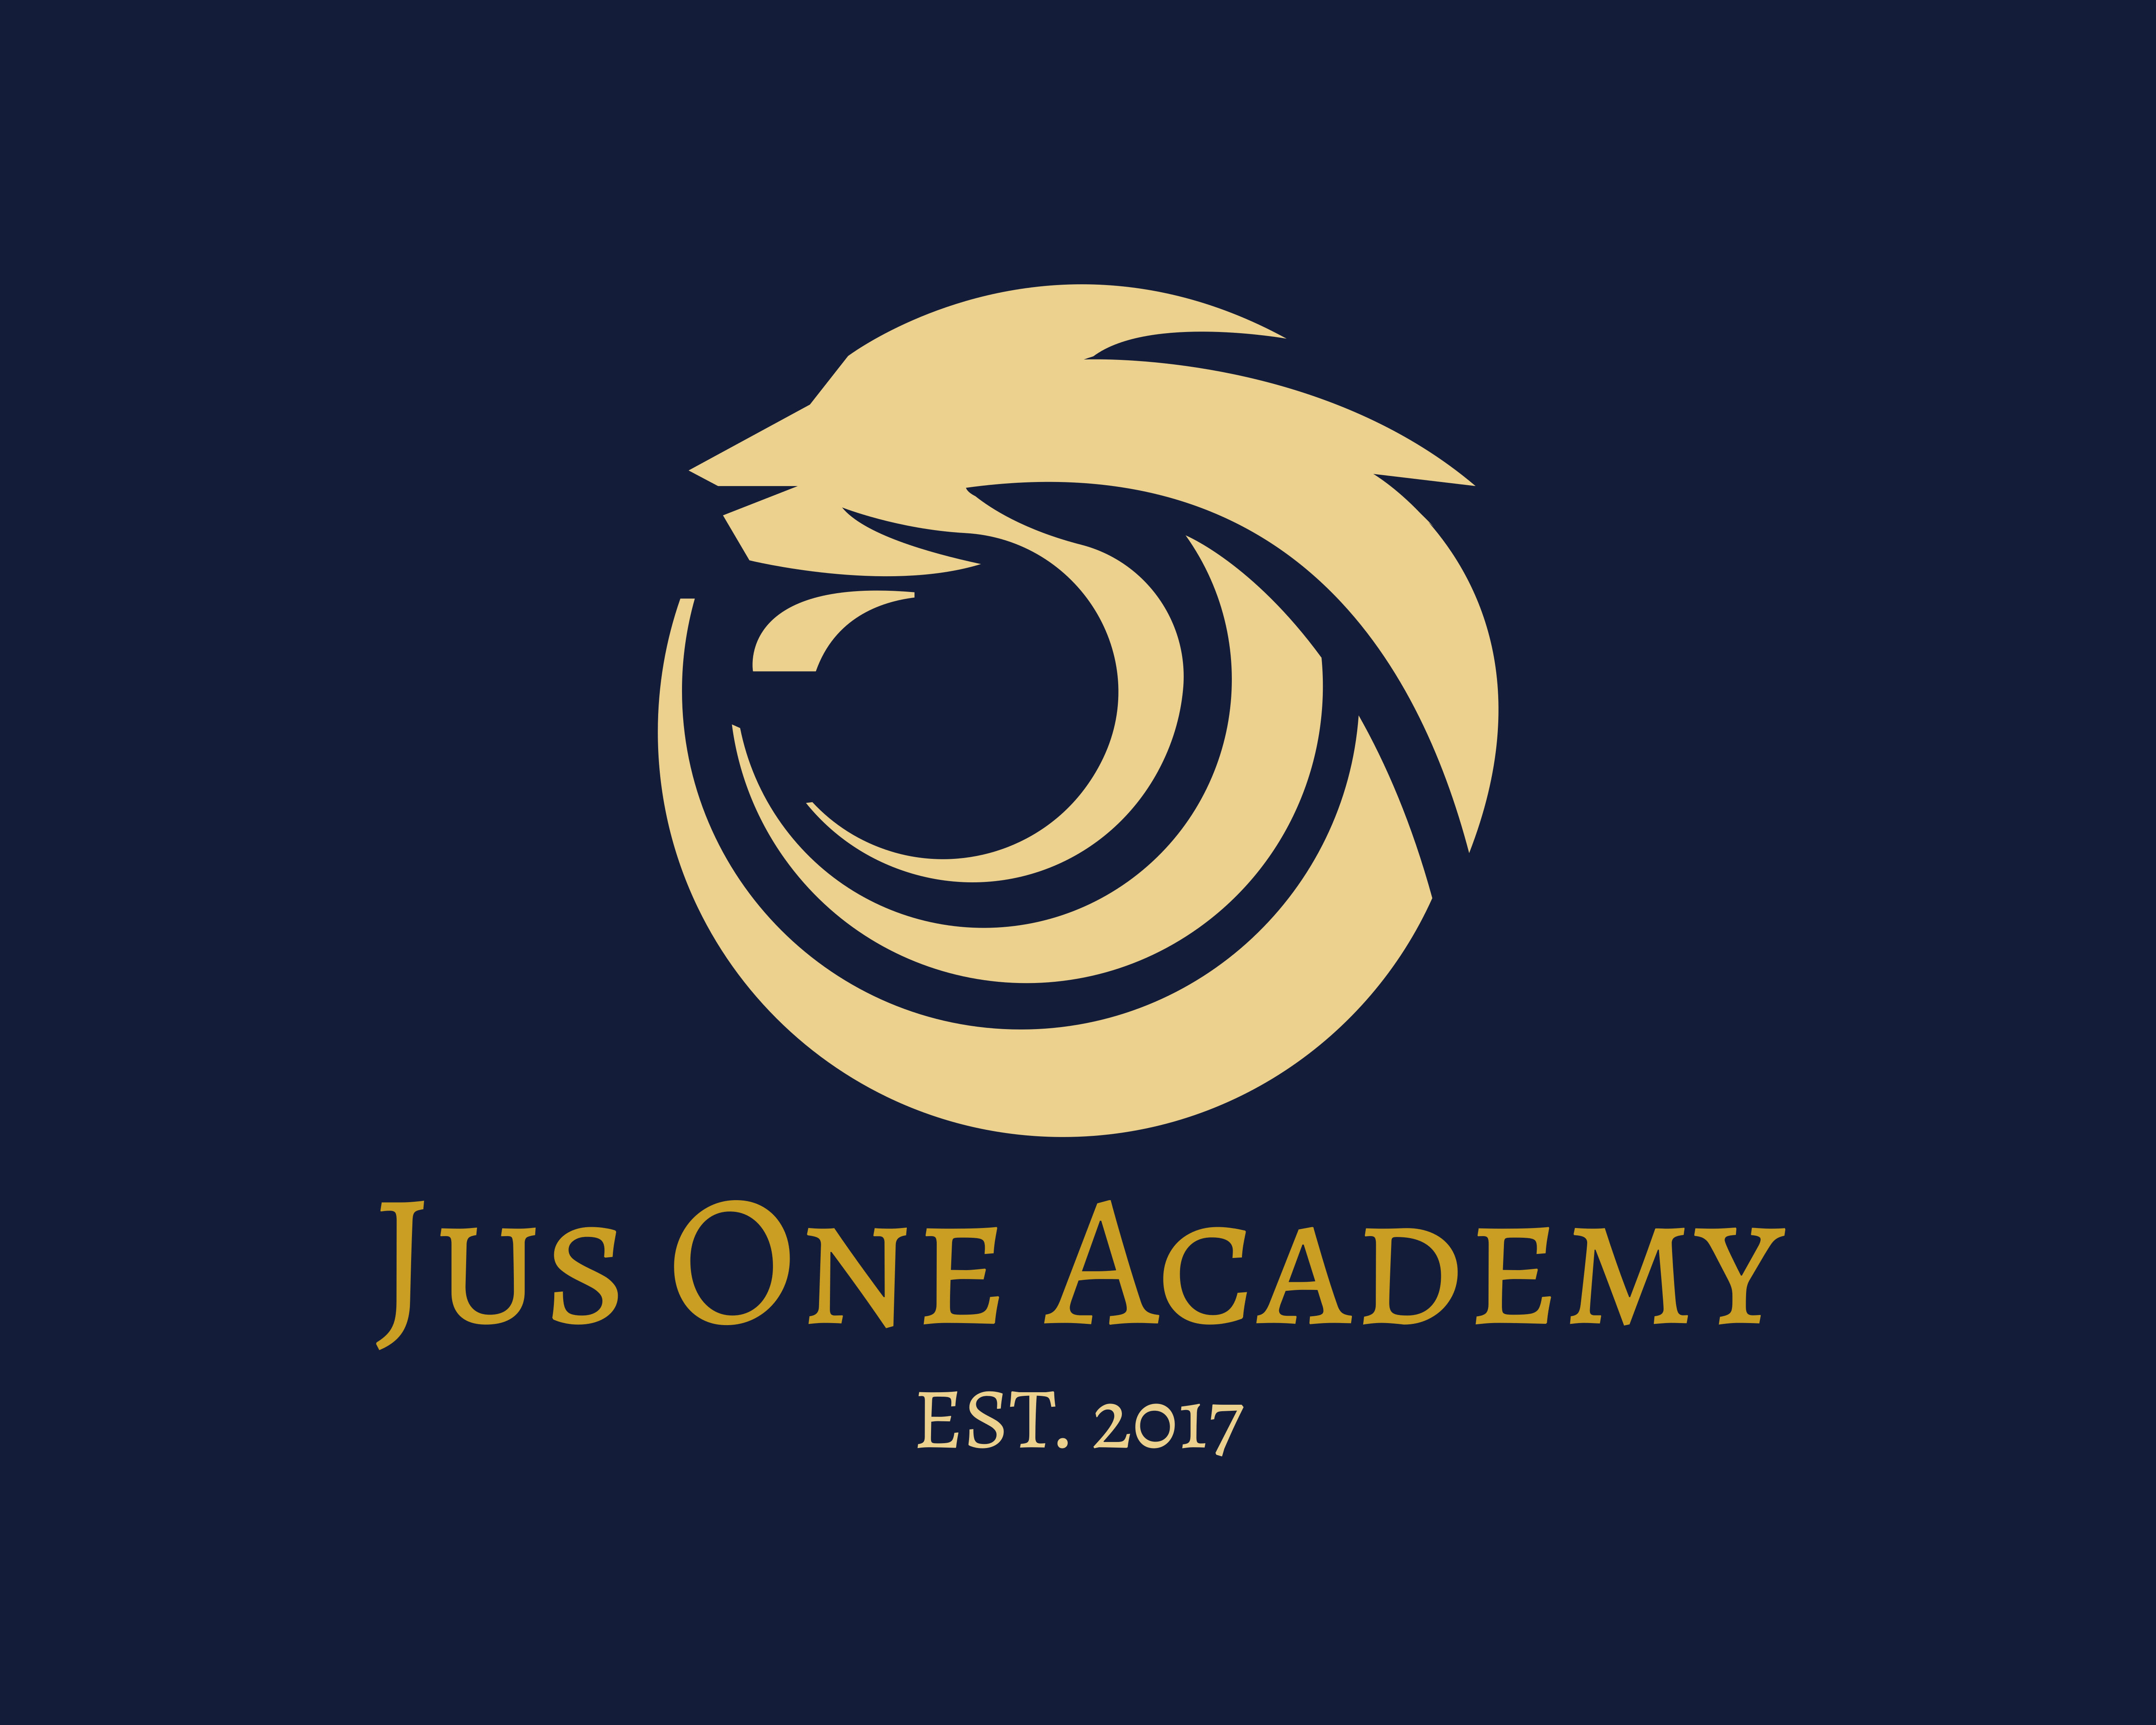 Jus One Academy